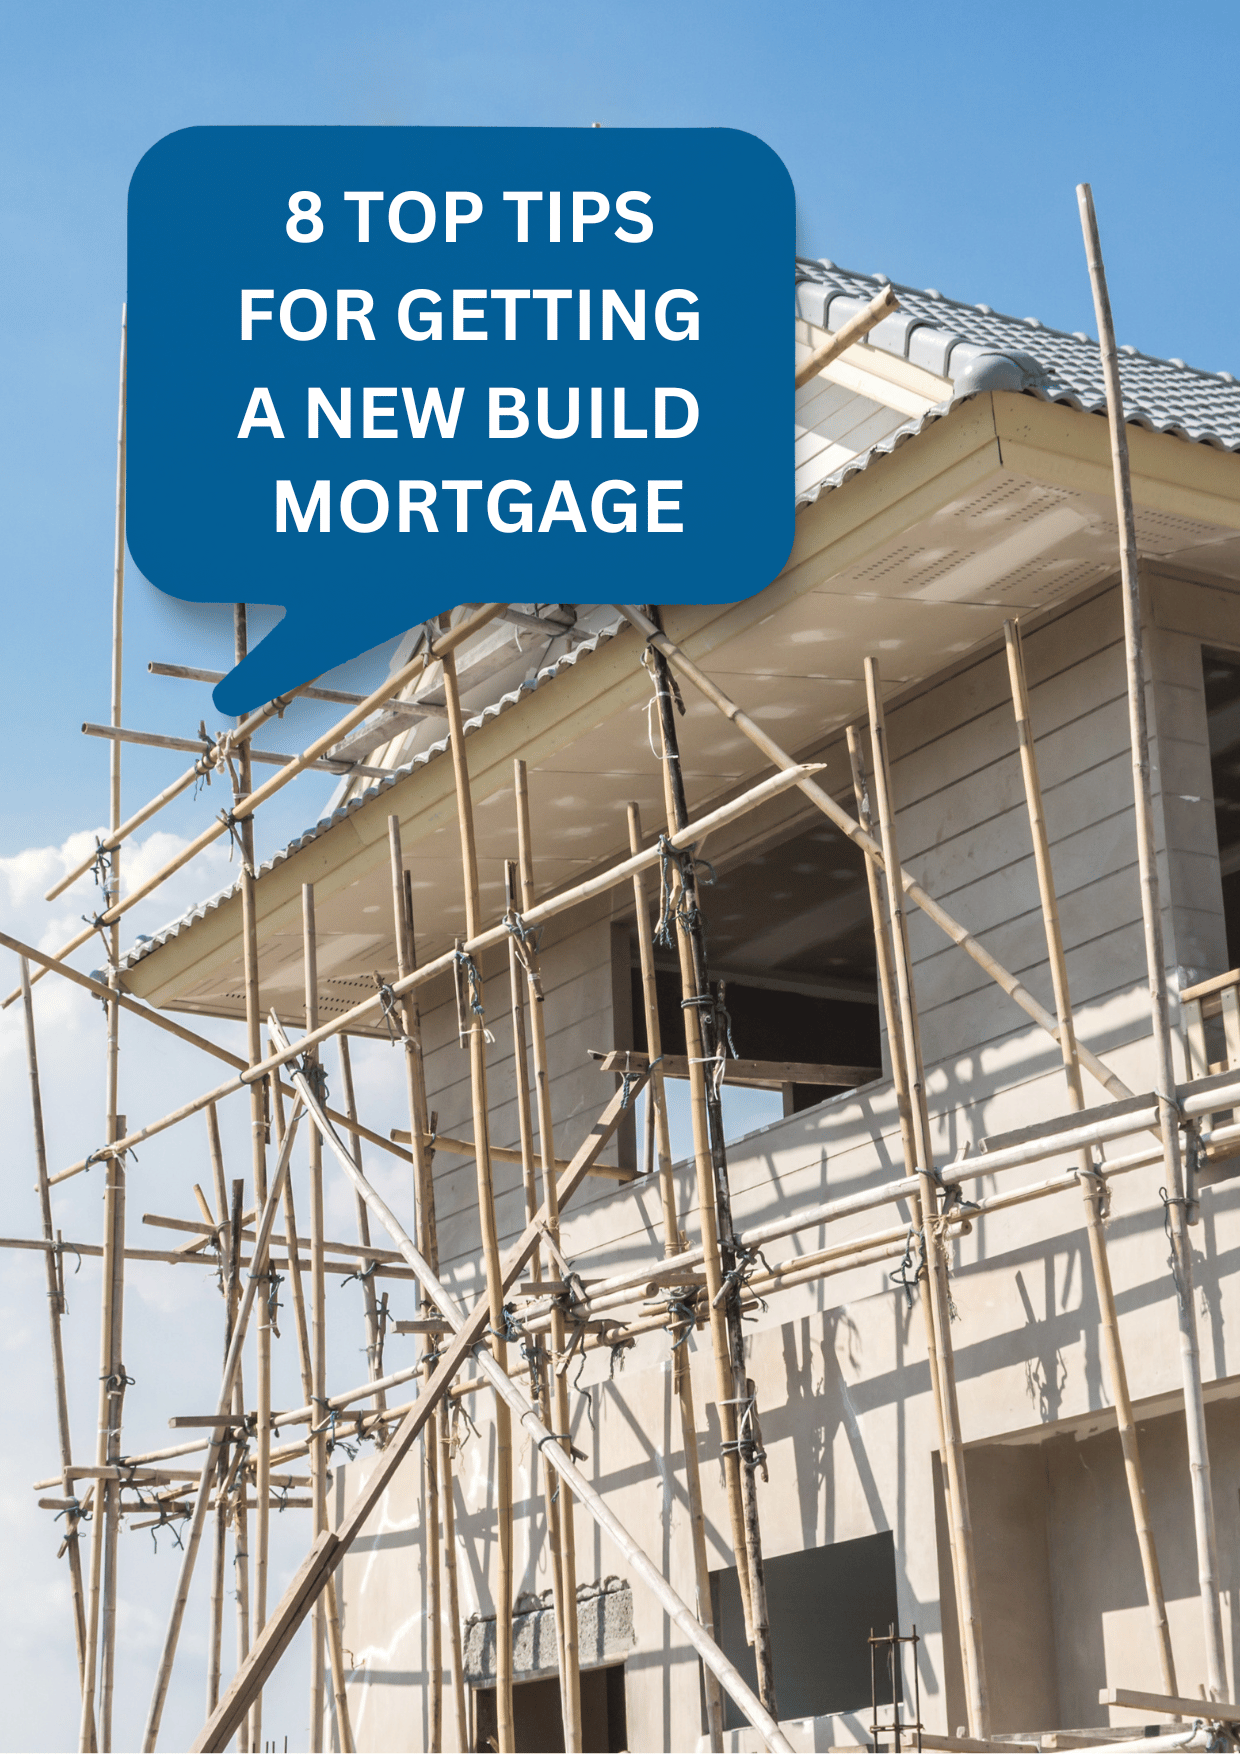 8 Top tips for getting a New Build Mortgage